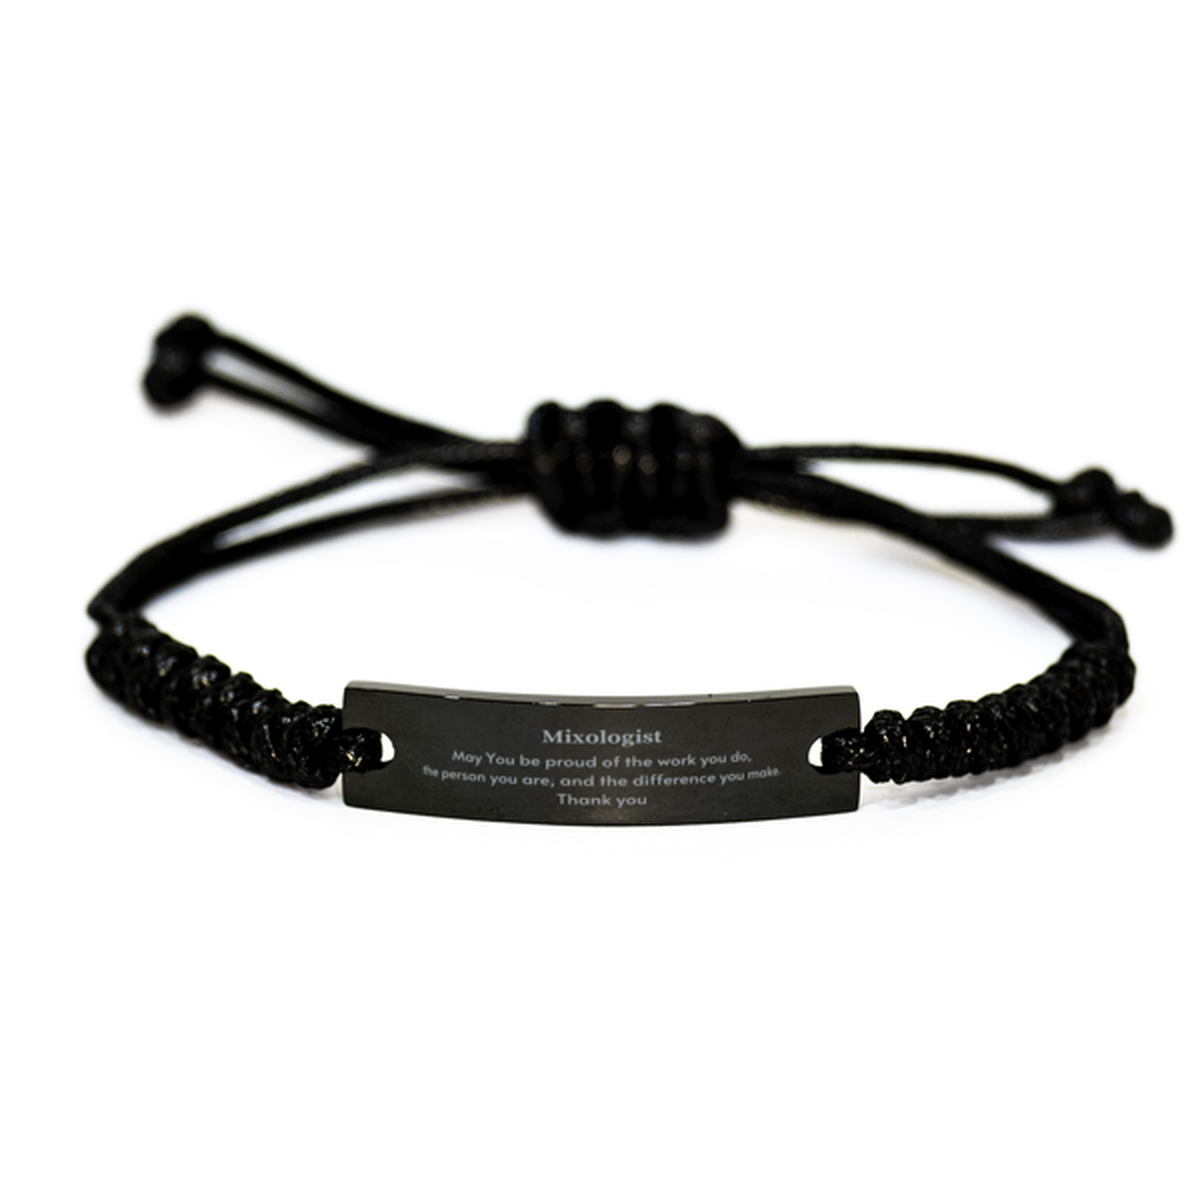 Heartwarming Black Rope Bracelet Retirement Coworkers Gifts for Mixologist, Mixologist May You be proud of the work you do, the person you are Gifts for Boss Men Women Friends